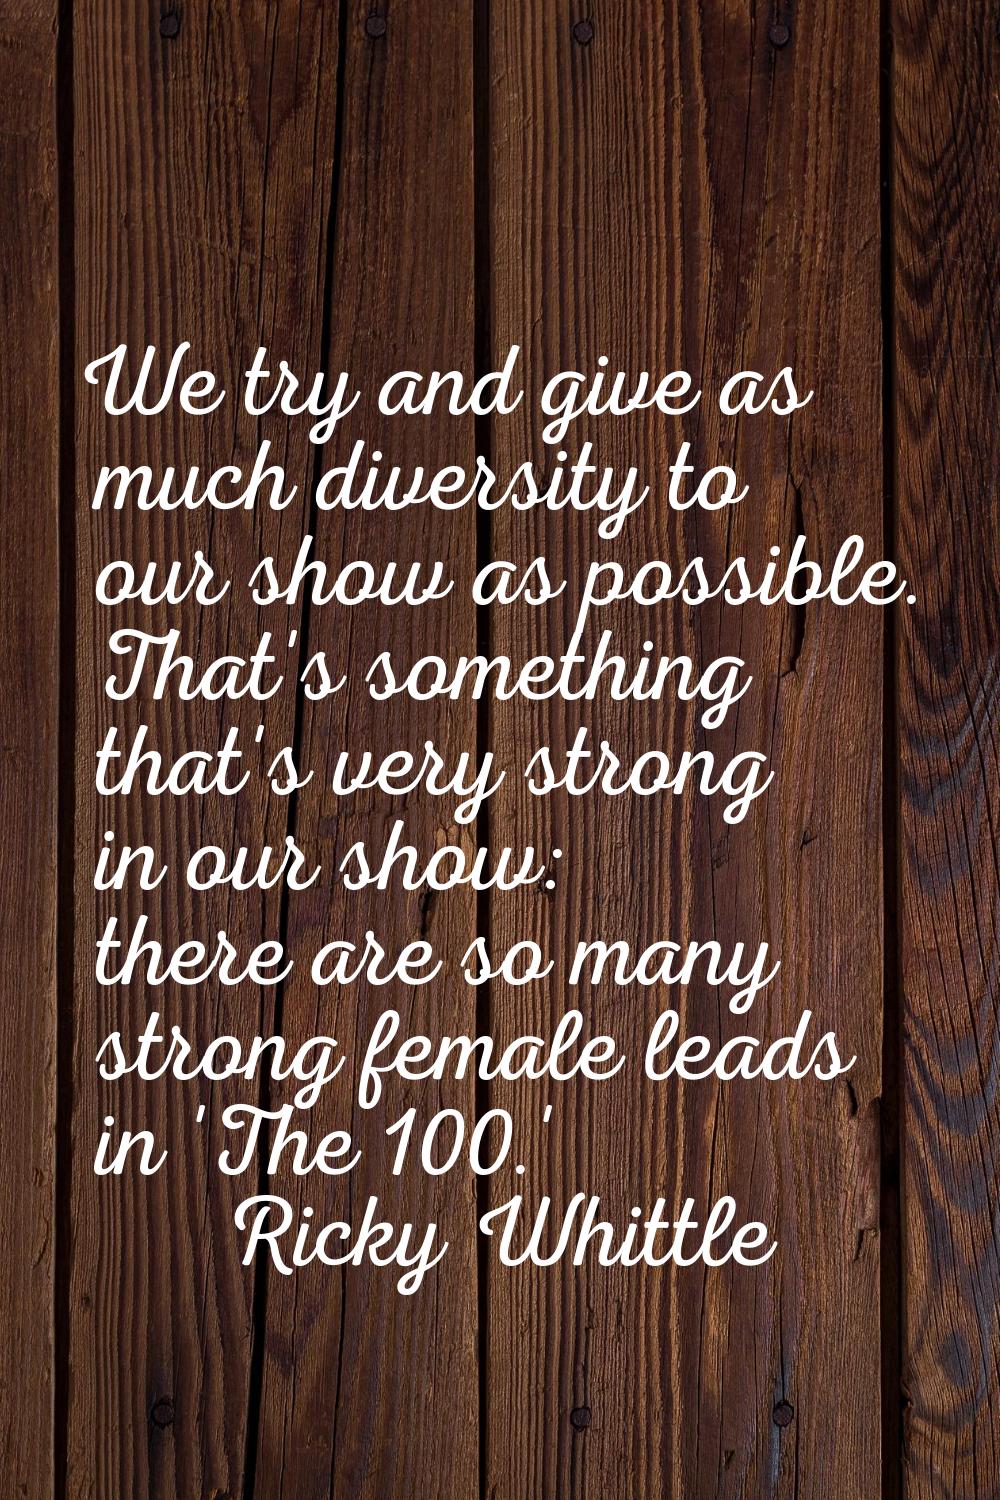 We try and give as much diversity to our show as possible. That's something that's very strong in o